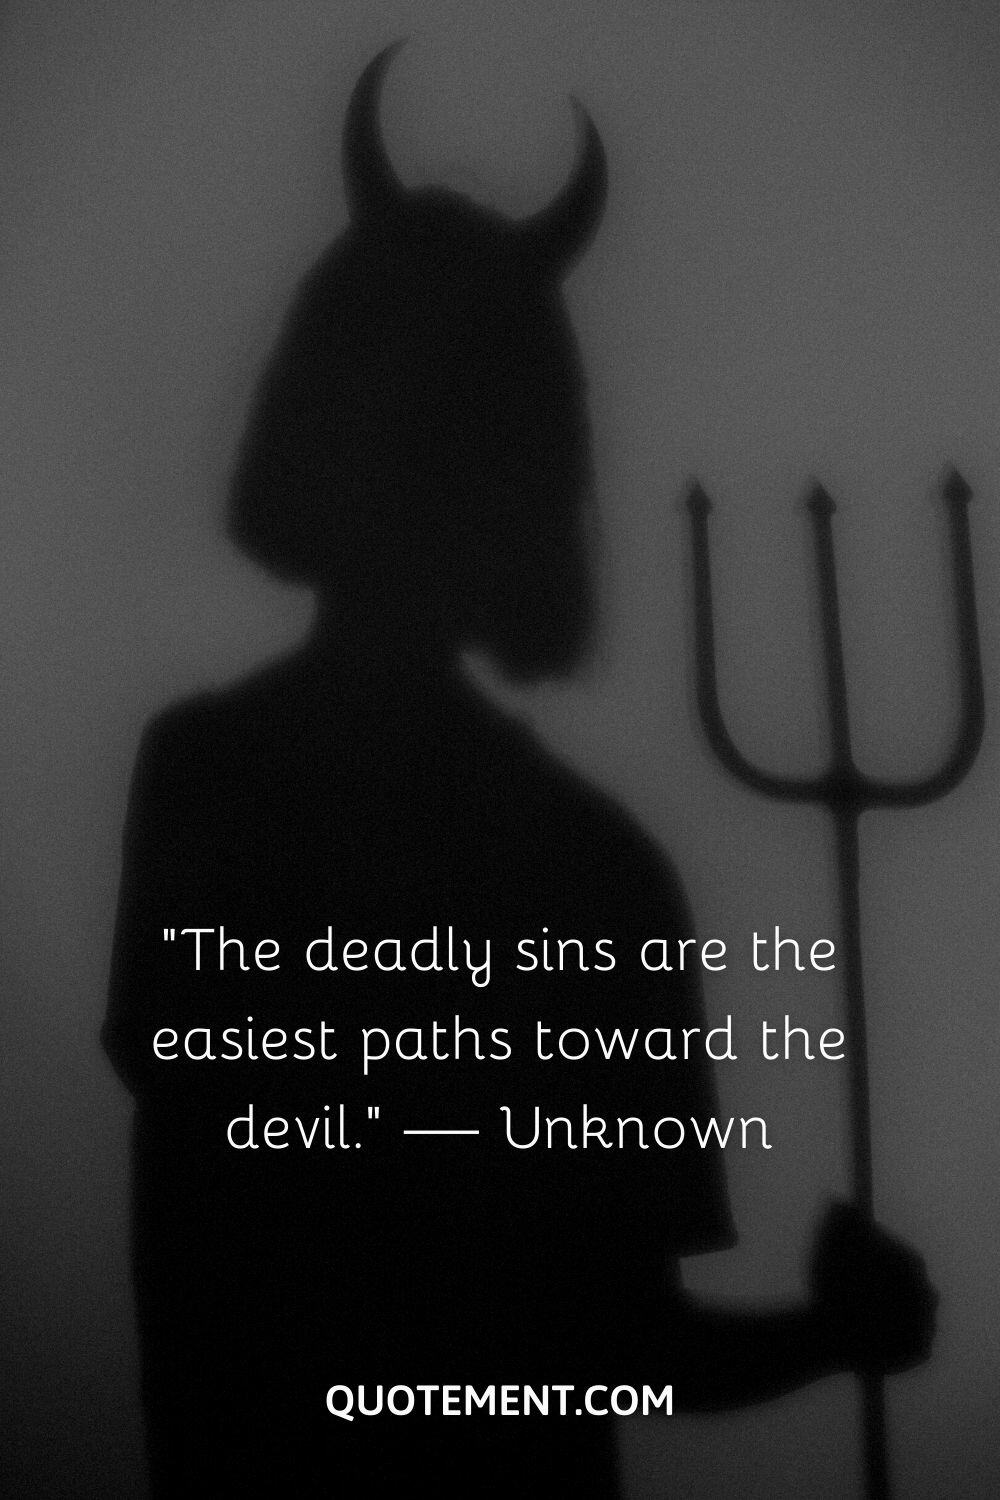 “The deadly sins are the easiest paths toward the devil.” — Unknown